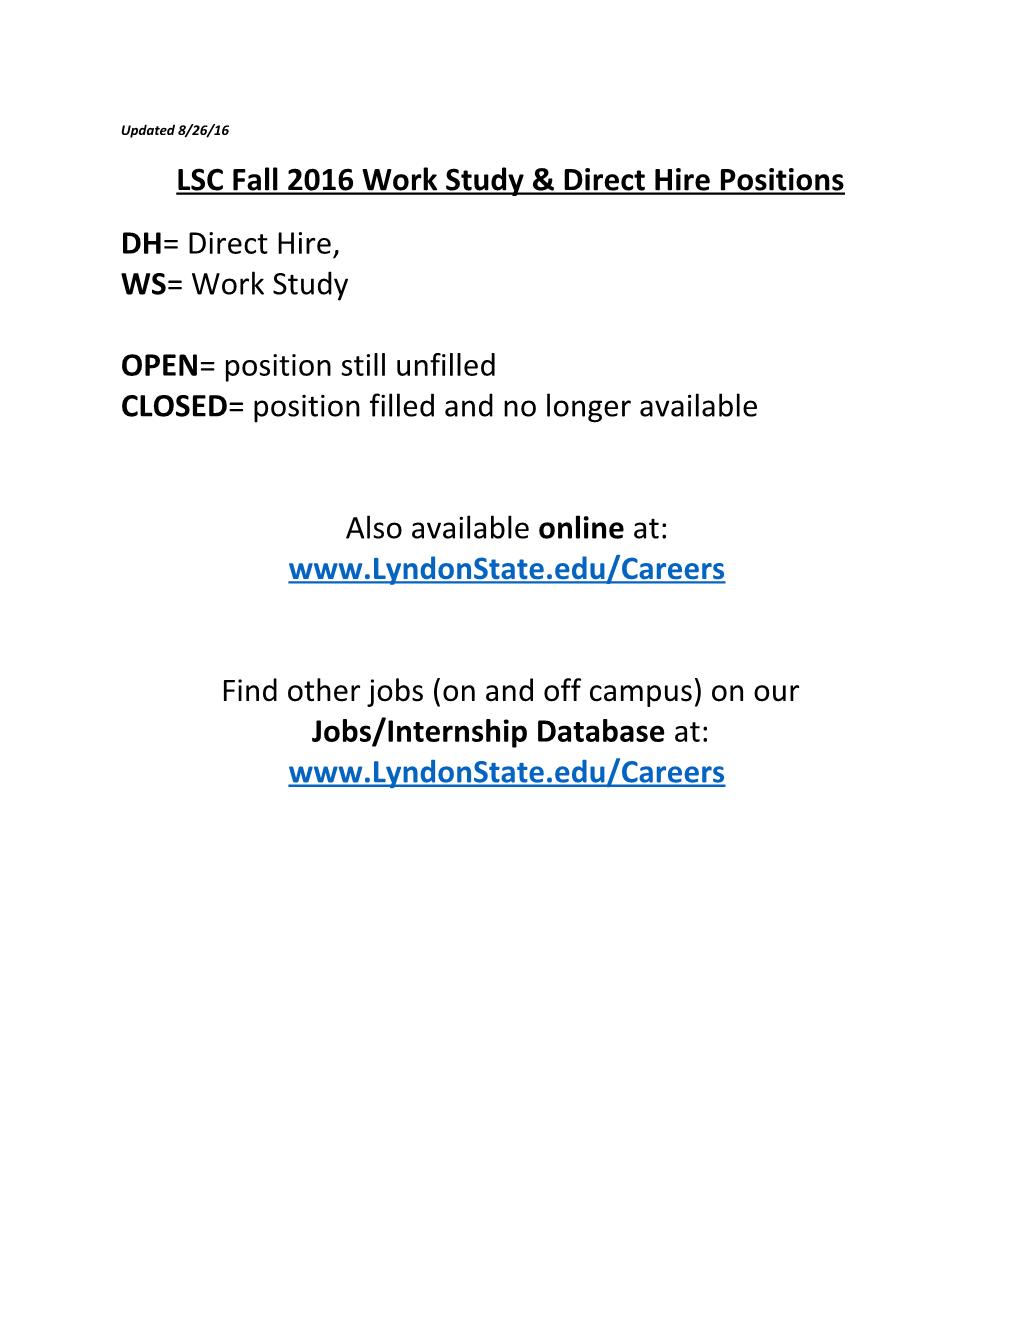 LSC Fall 2016 Work Study & Direct Hire Positions